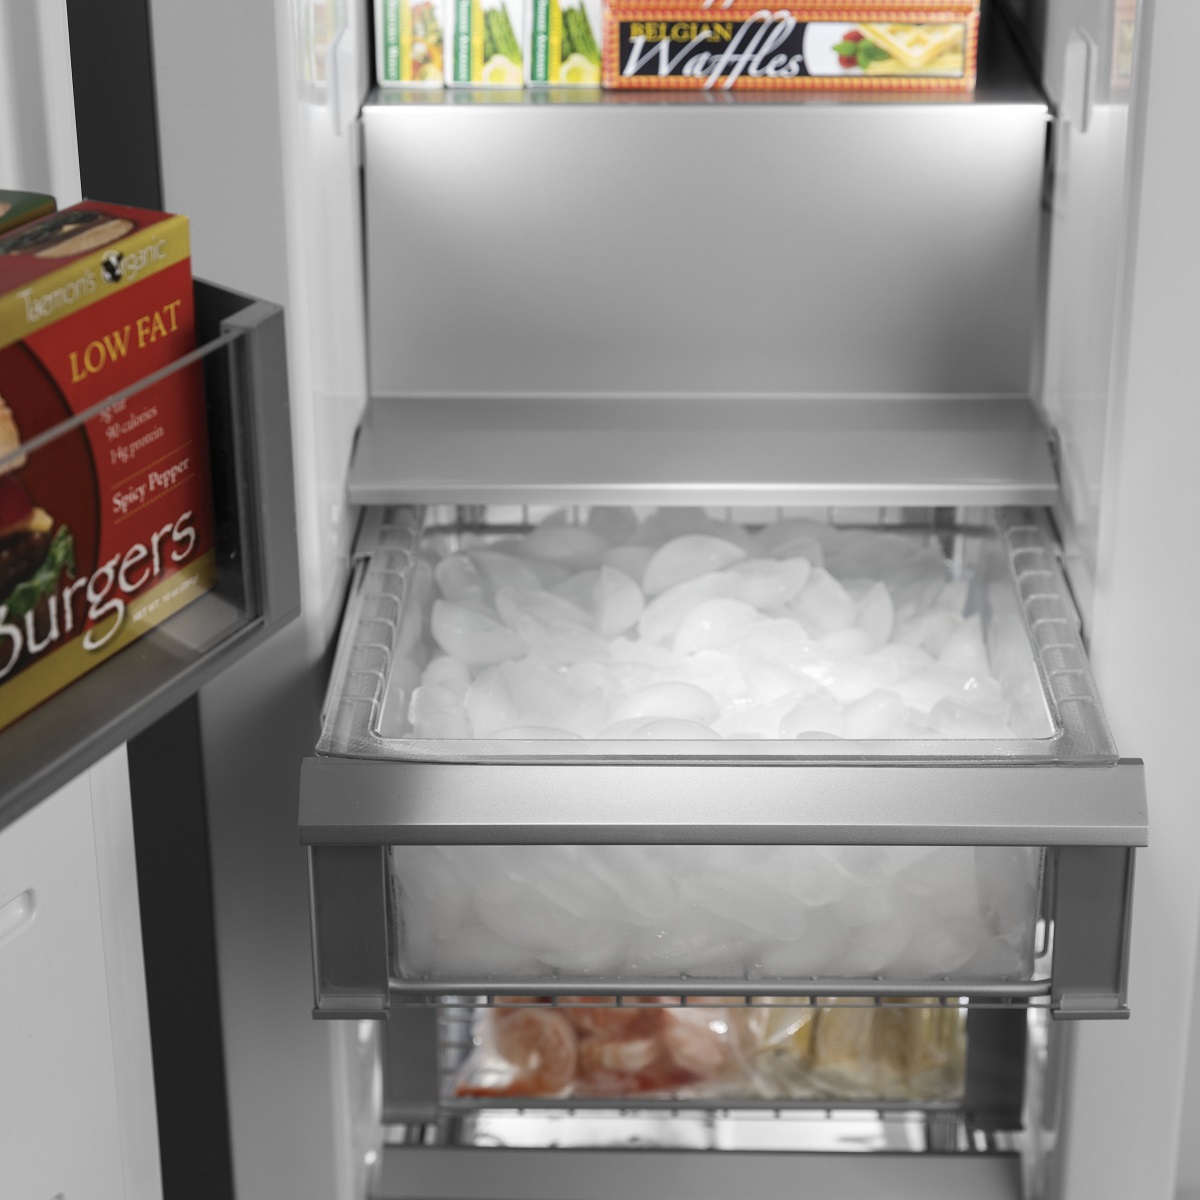 What Refrigerator Has The Best Ice Maker